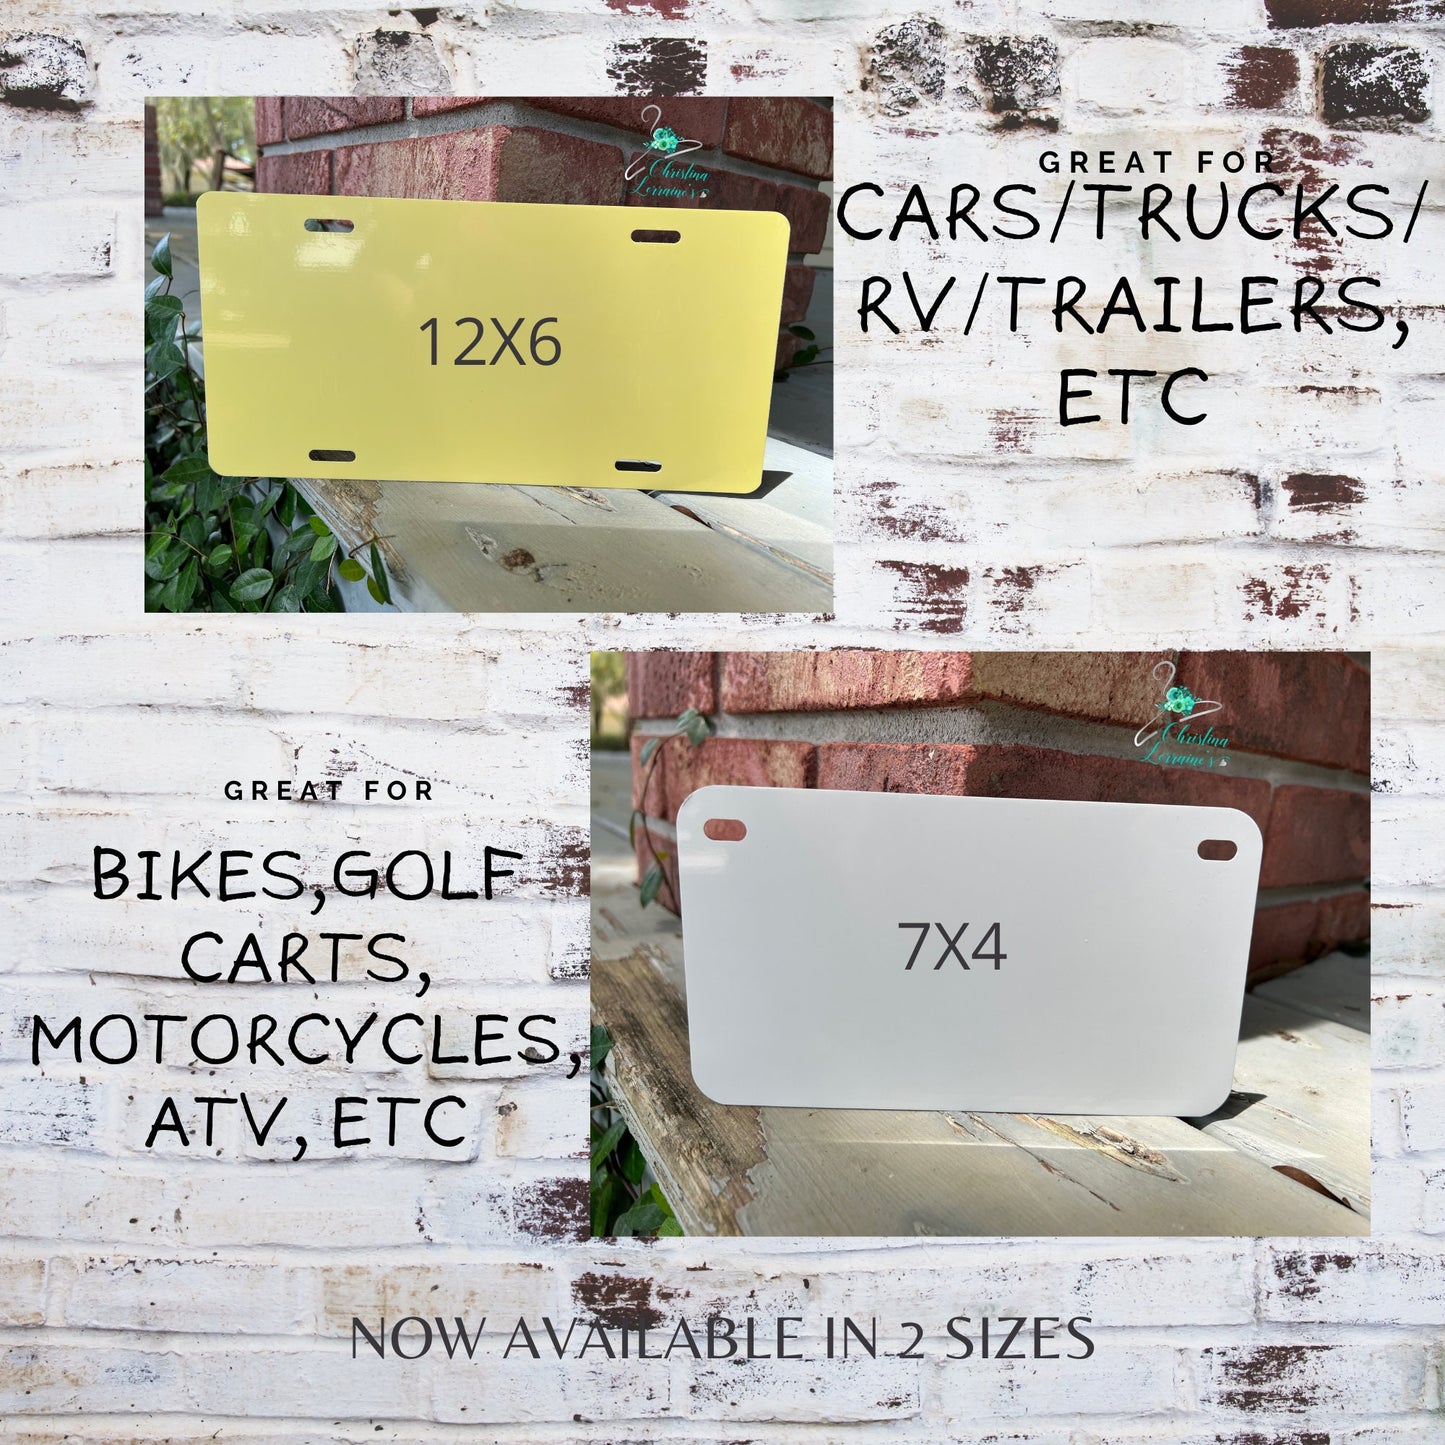 NEW What you know about rolling (side by side atv design) Car/ BIKE/ATV Tag/ License Plate